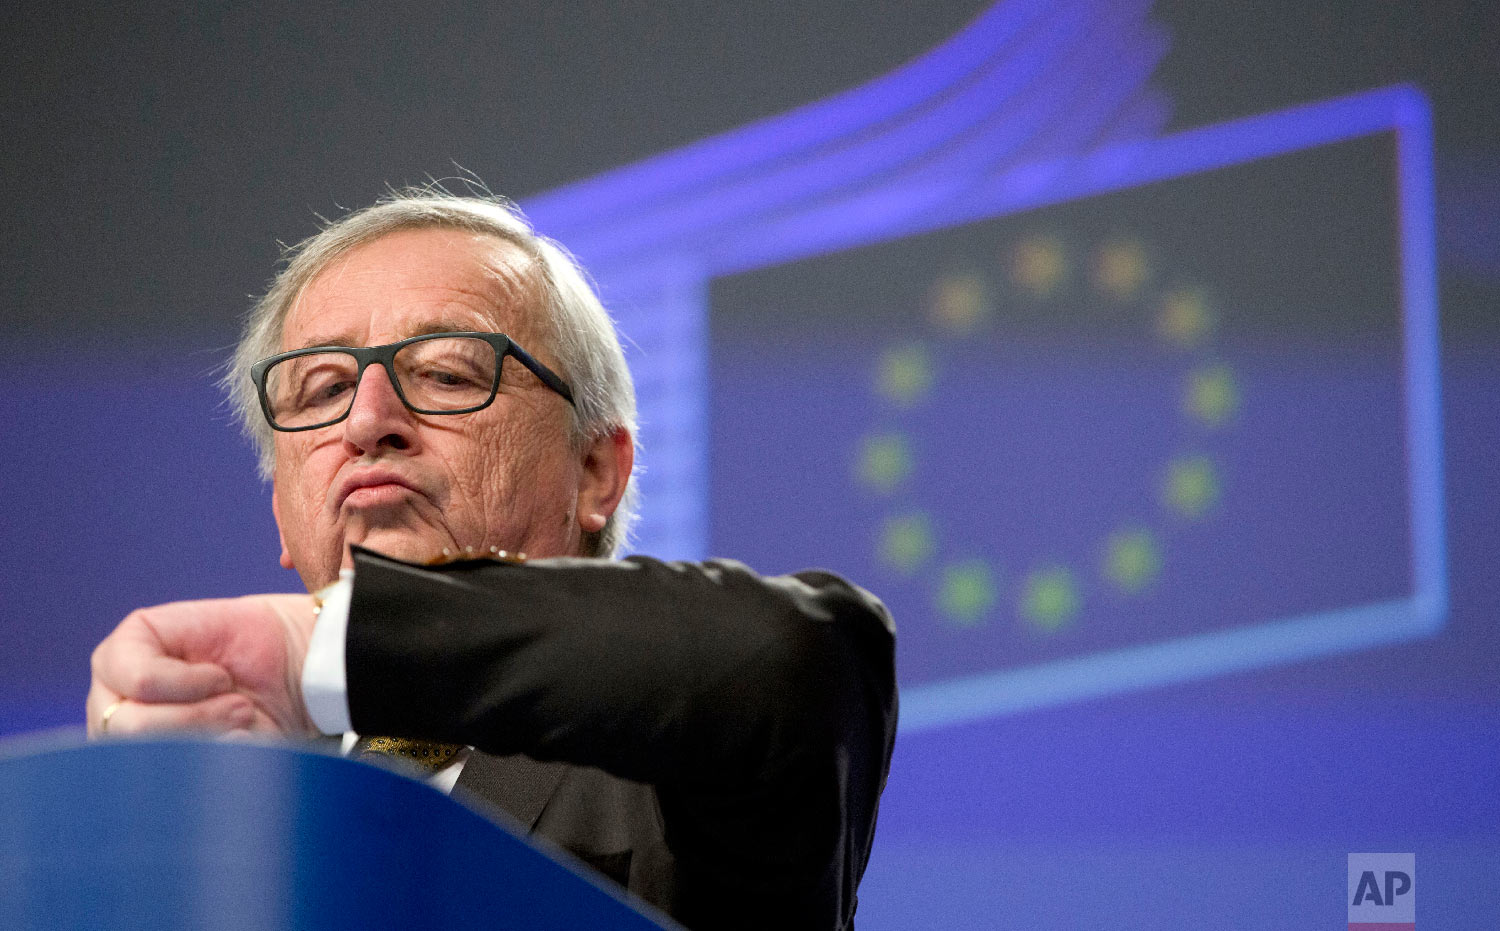  European Commission President Jean-Claude Juncker looks at his watch at the end of a media conference at EU headquarters in Brussels on Feb. 21, 2018. (AP Photo/Virginia Mayo) 